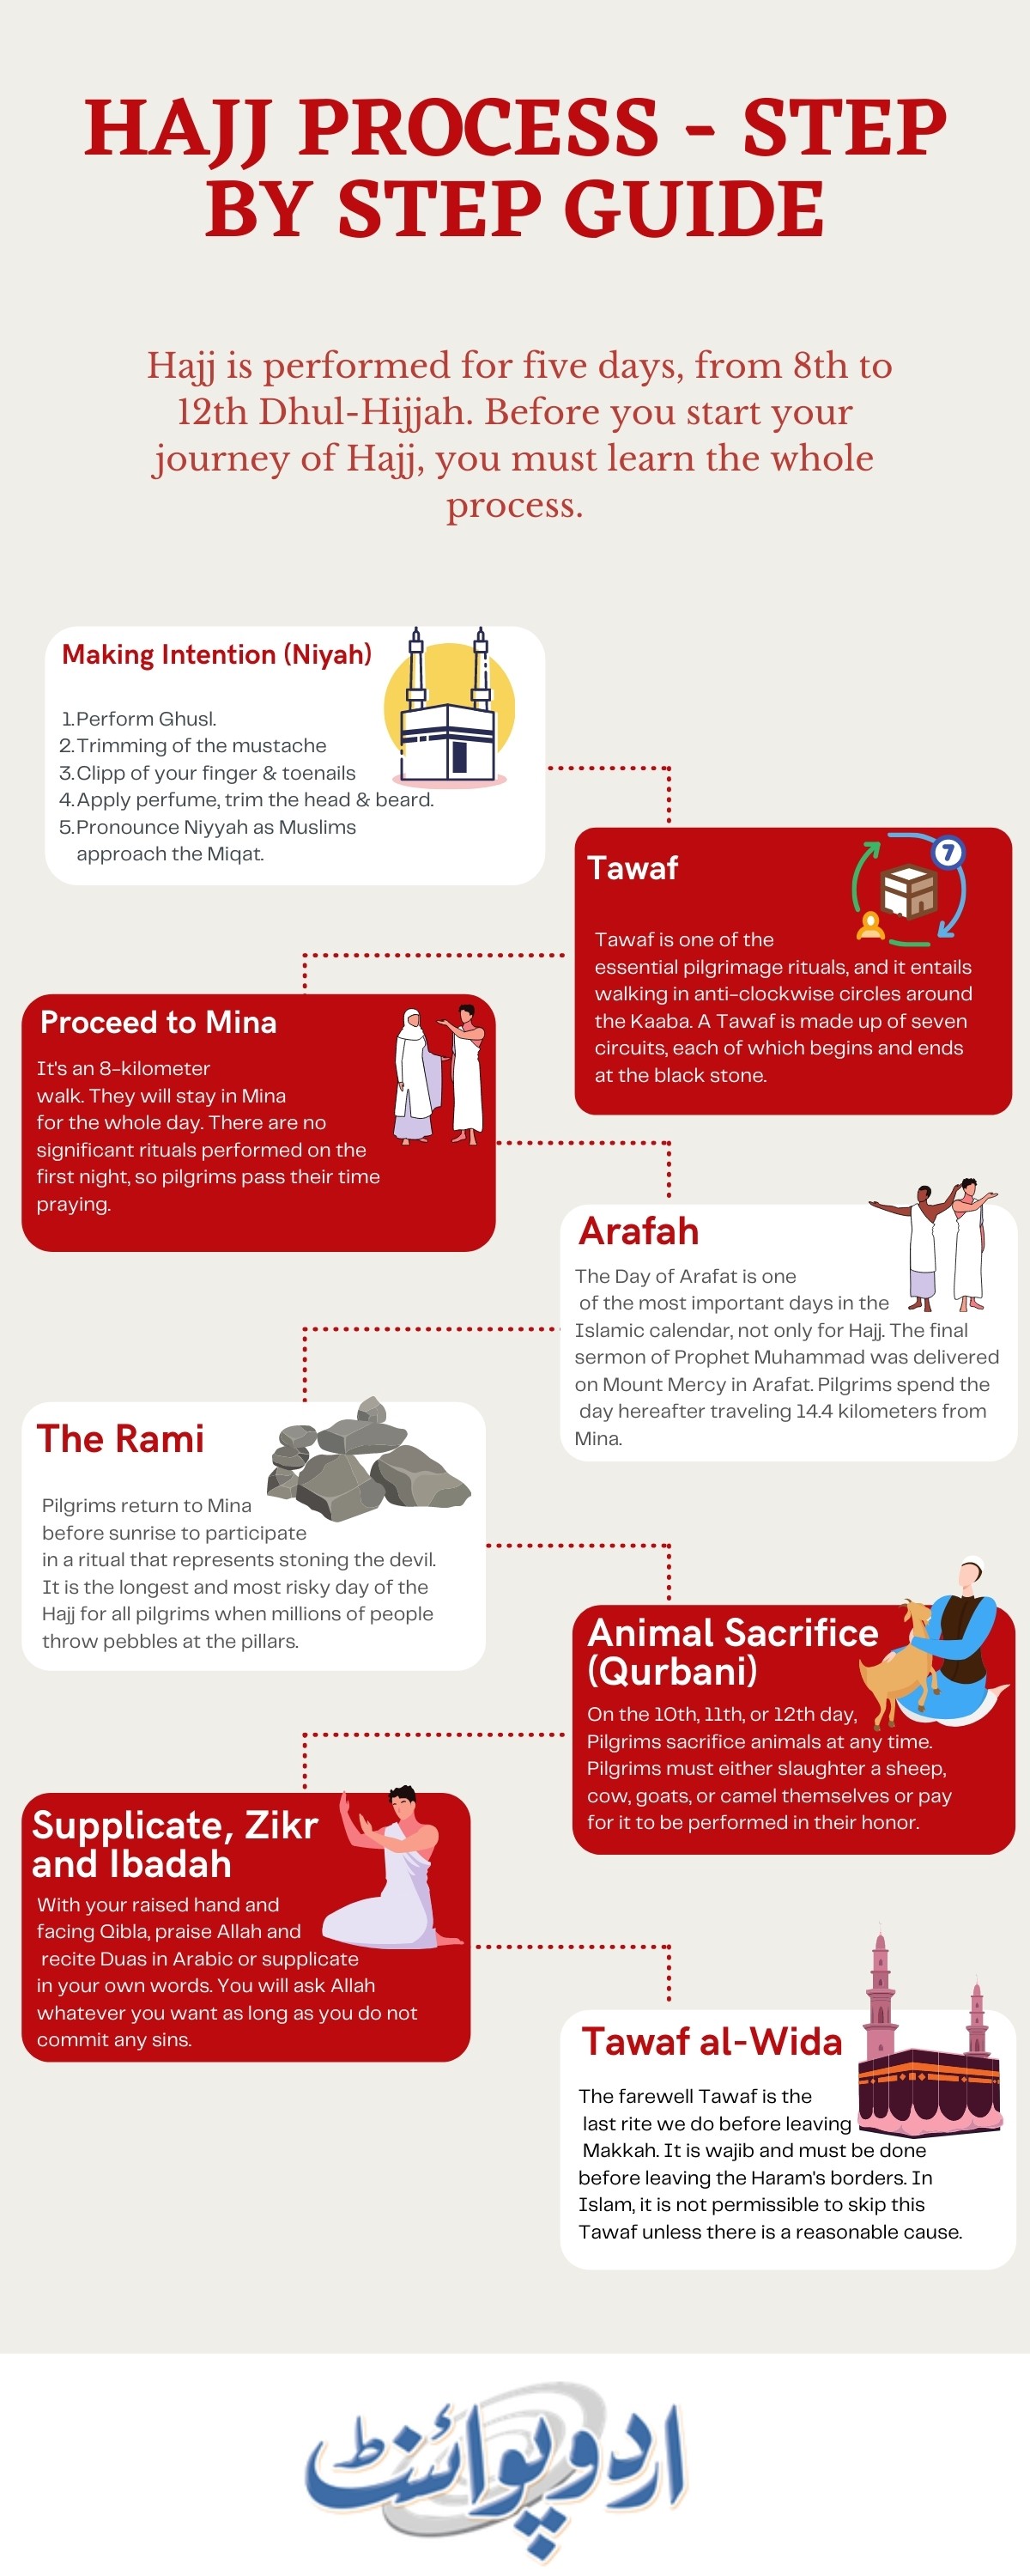 A step by step guide on how Muslims perform Hajj